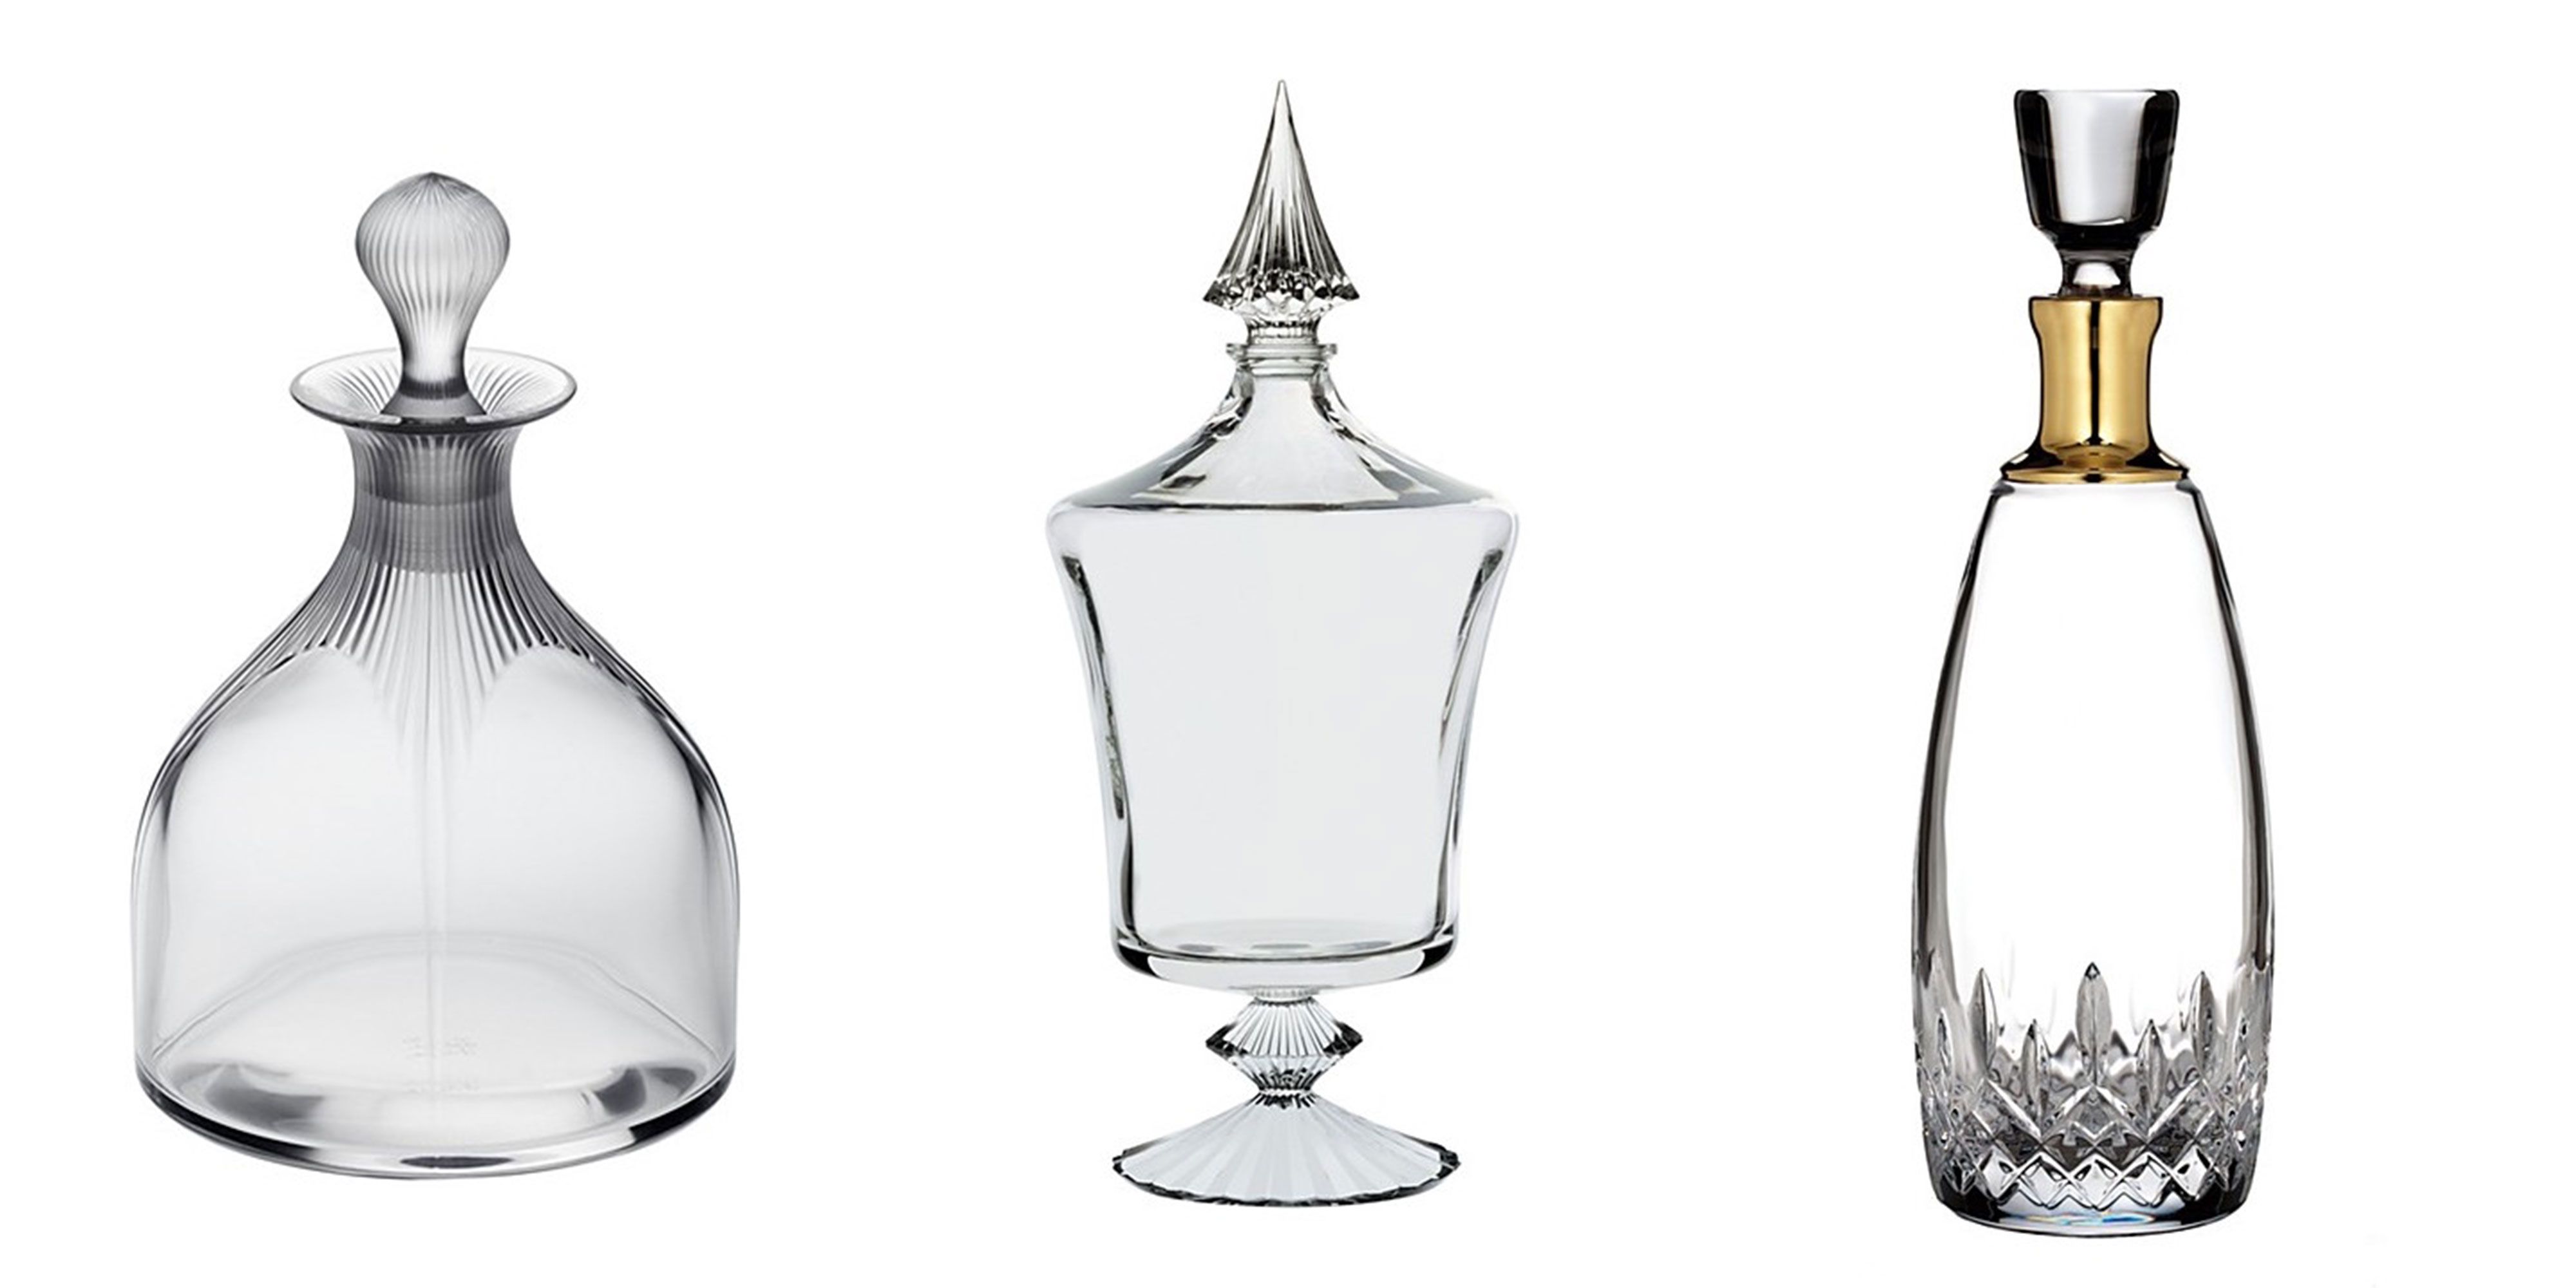 11 Best Wine Decanters for 2018 - Stylish Glass & Crystal Decanters